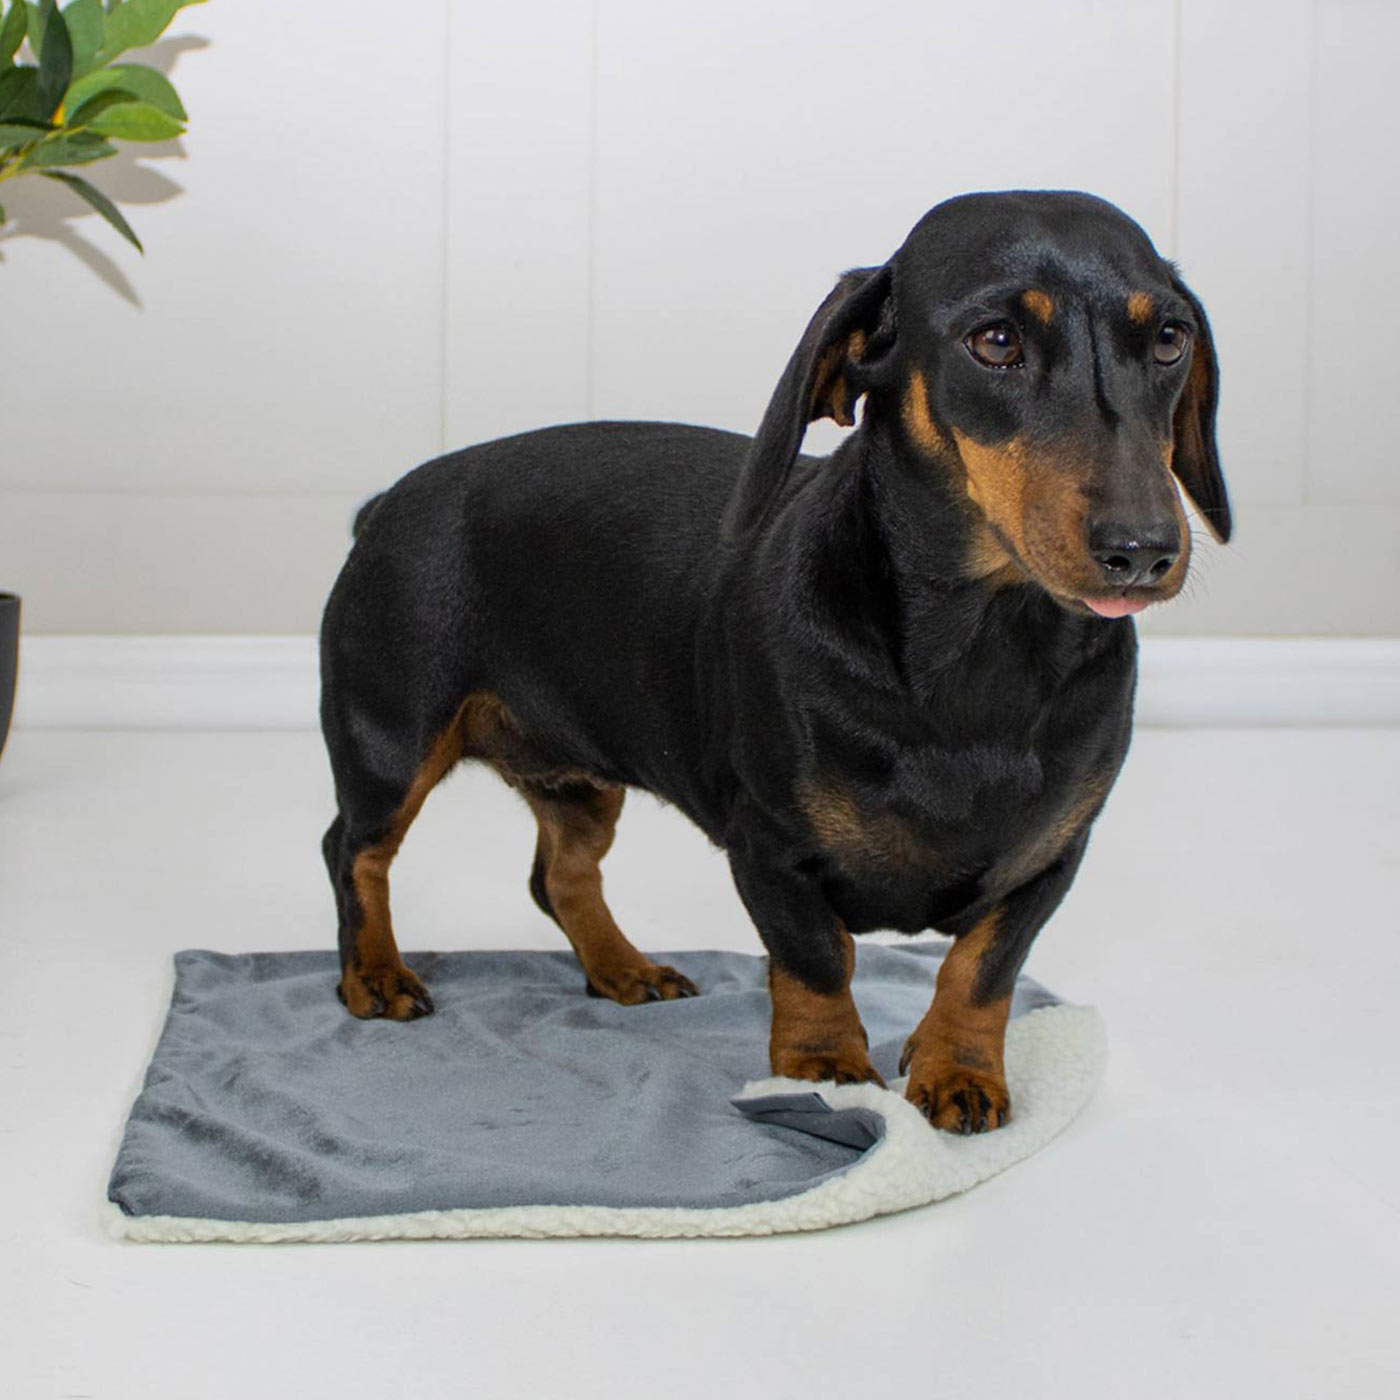 [color:elephant velvet] Luxury Velvet Pet Blanket, In Stunning Elephant Velvet. The Perfect Blanket For Dogs, Available at Lords & Labradors US